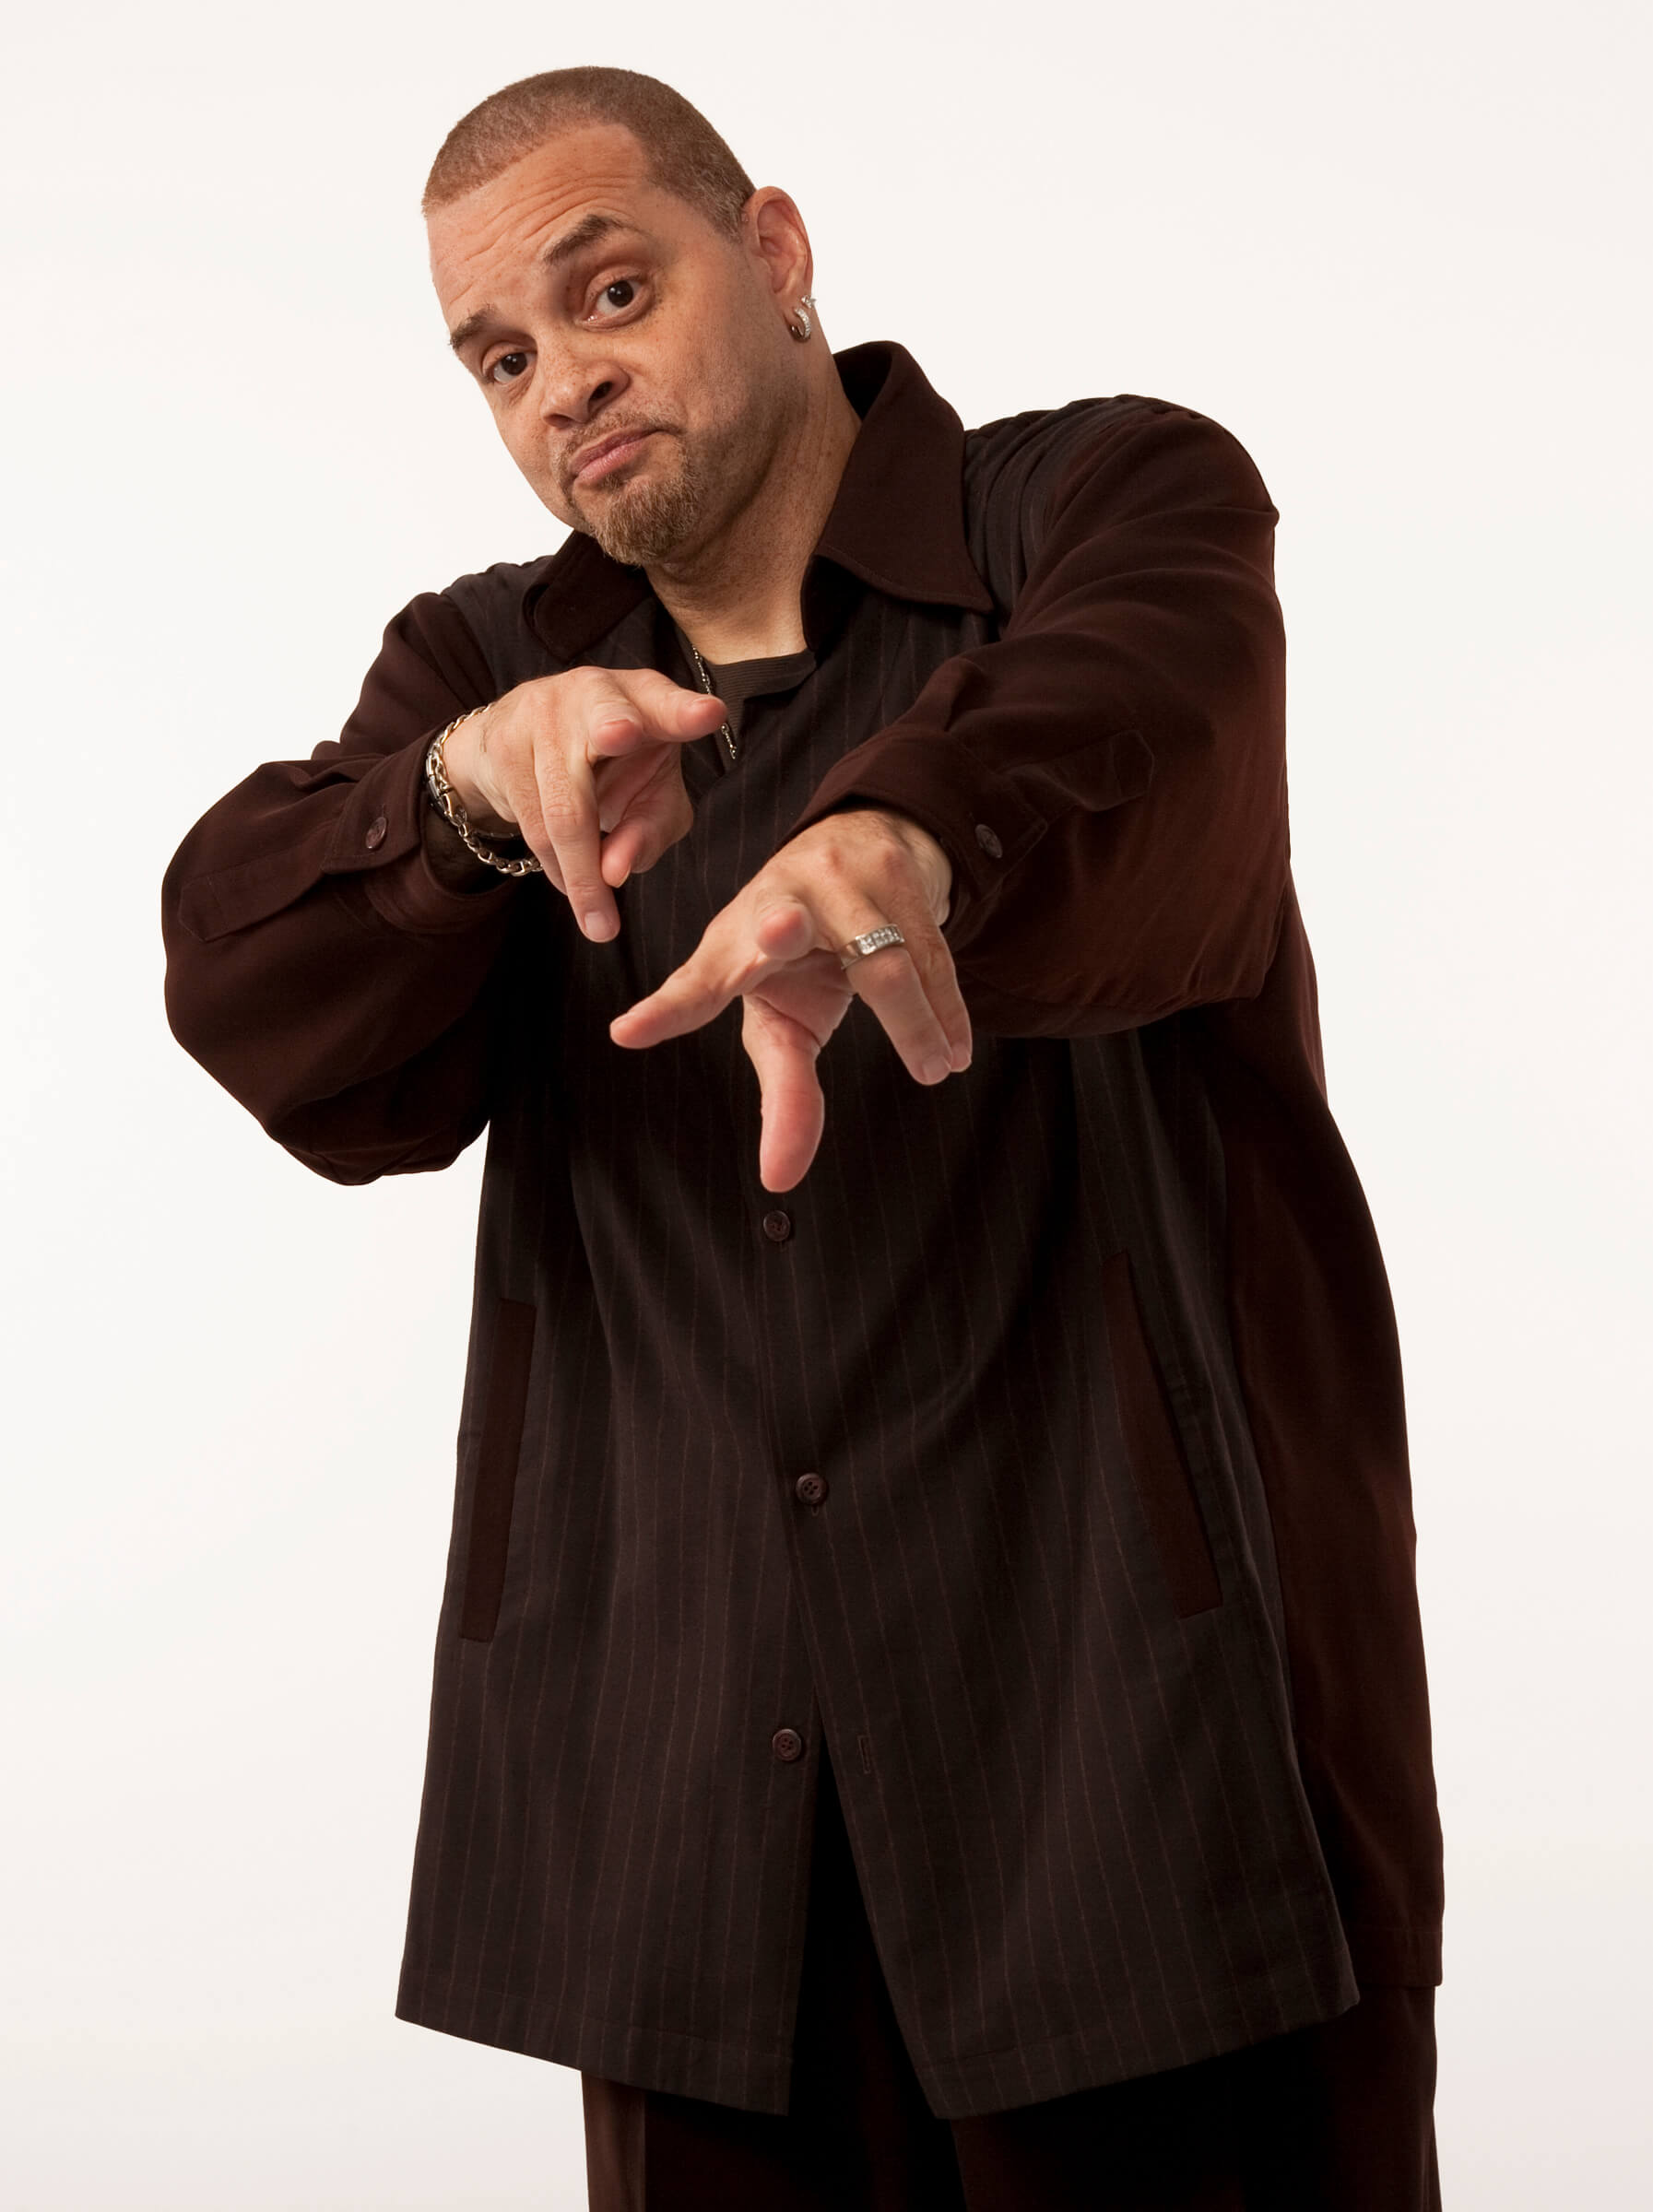 Hire Comedian Sinbad for Your Event PDA Speakers